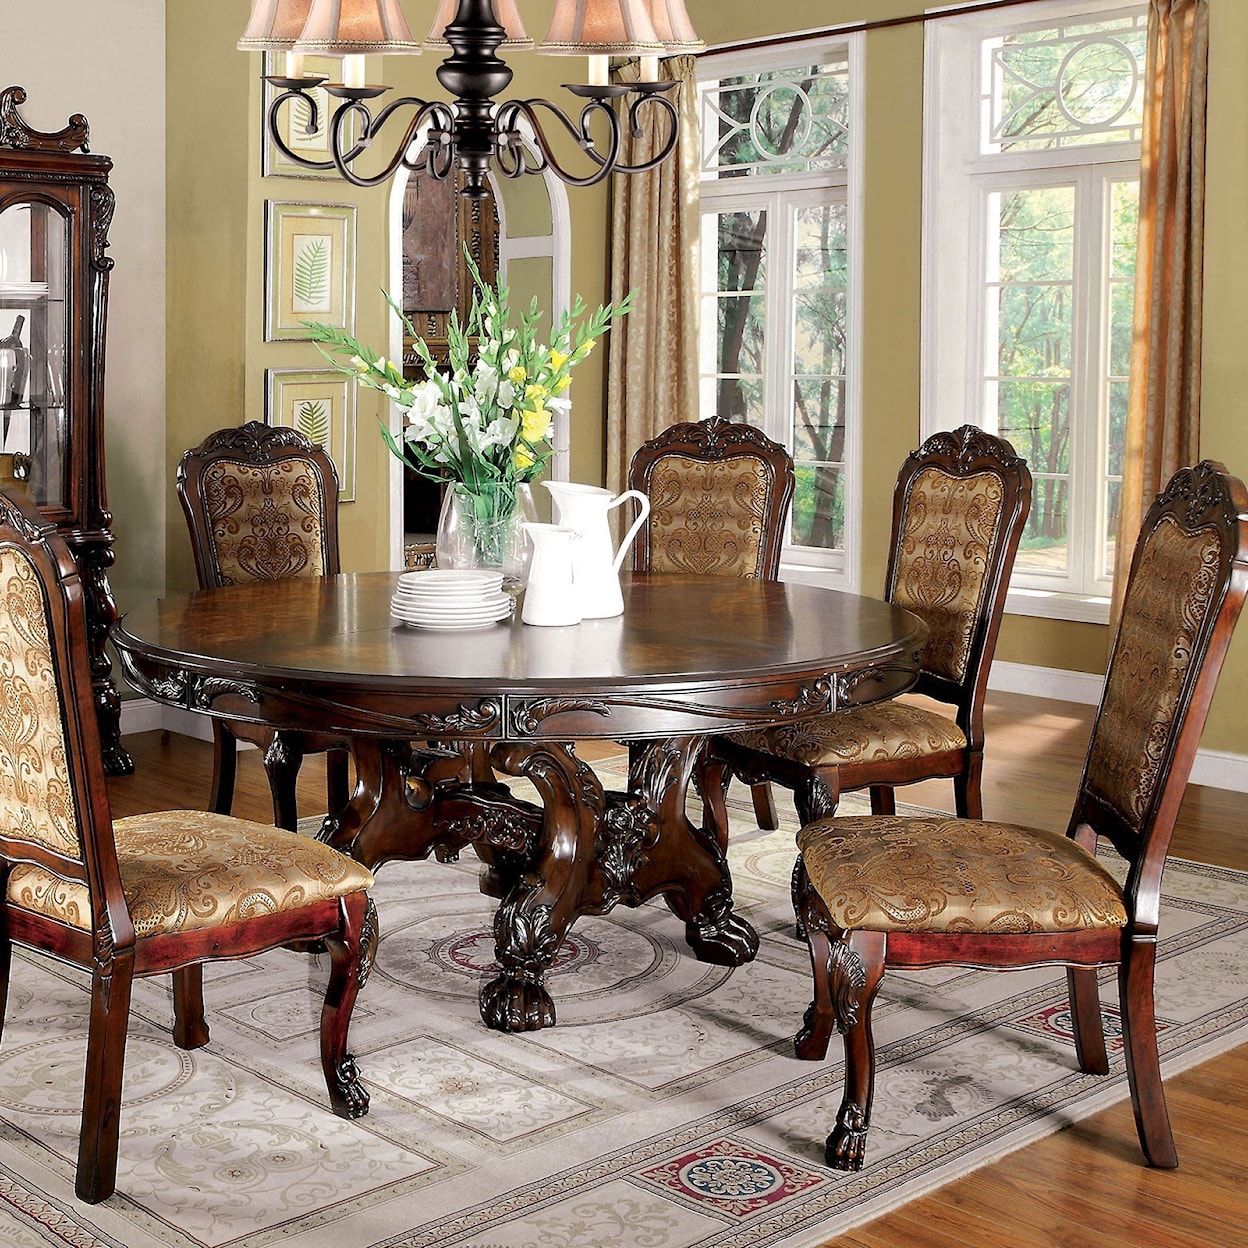 Furniture of America Medieve Round Dining Table